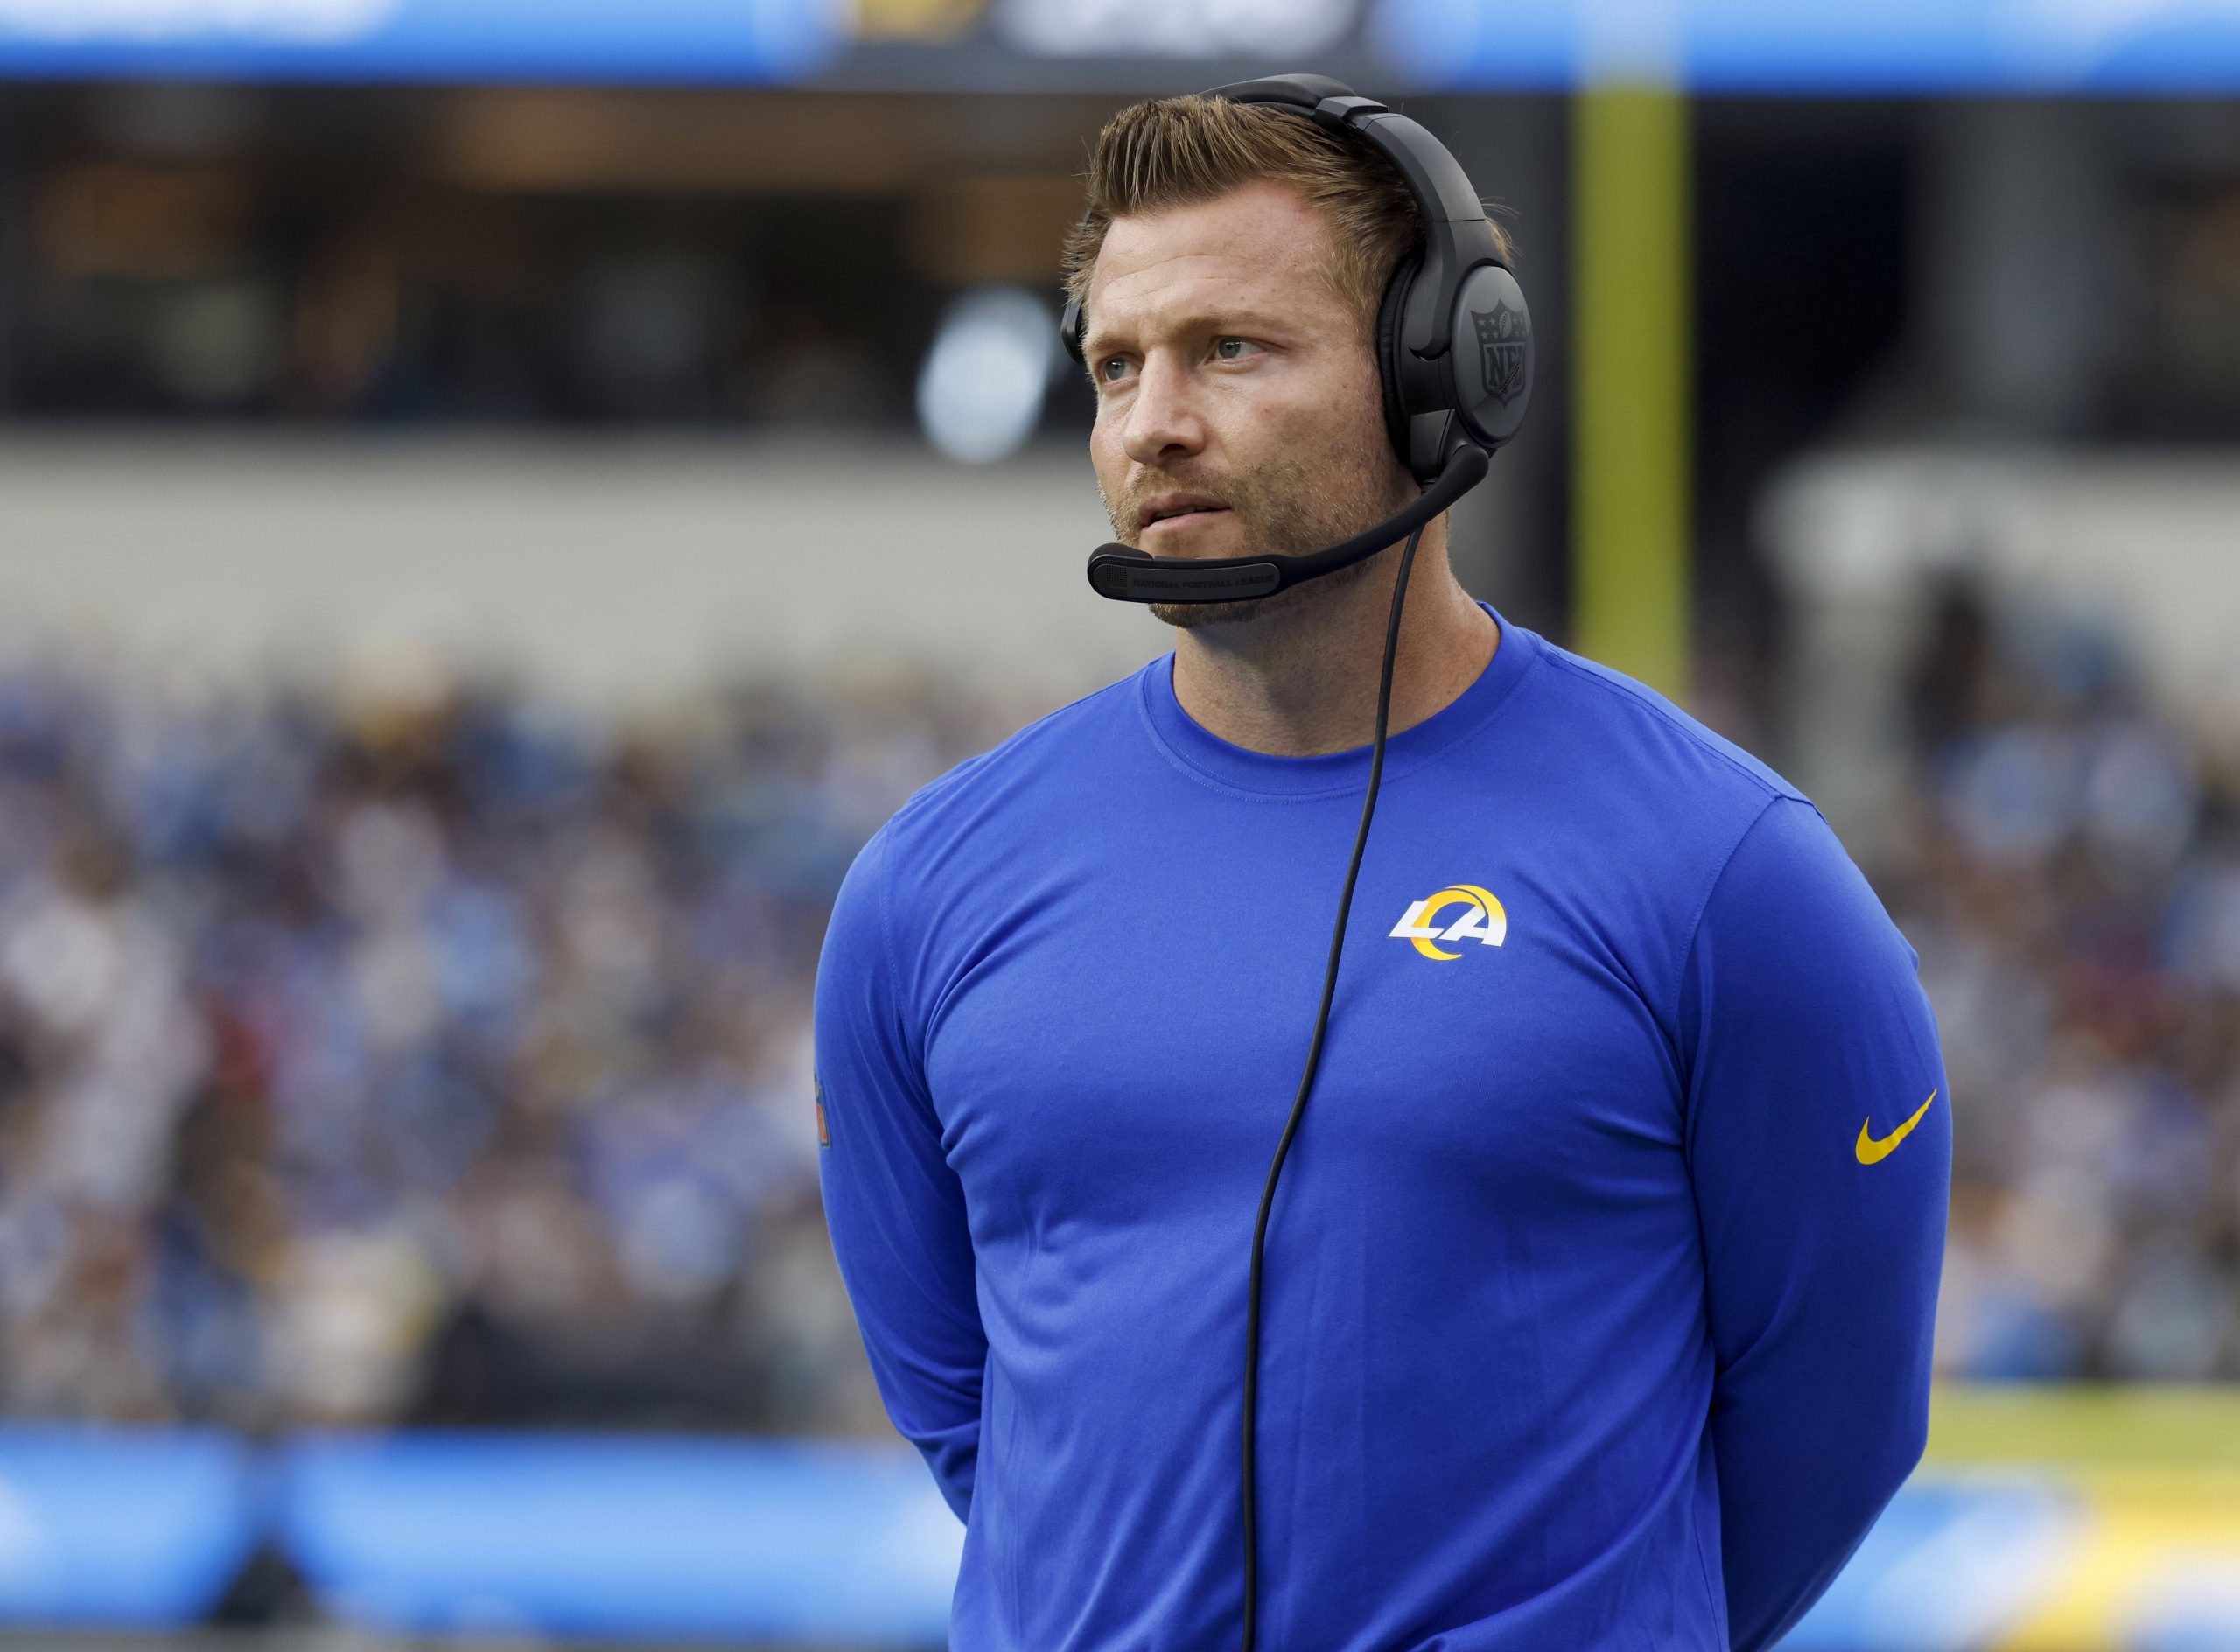 January 01, 2023 Los Angeles Rams head coach Sean McVay in action during the NFL, American Football Herren, USA football game between the Los Angeles Rams and the Los Angeles Chargers in Inglewood, California. Mandatory Photo Credit : /CSM Inglewood United States of America - ZUMAc04_ 20230101_zaf_c04_268 Copyright: xCharlesxBausx